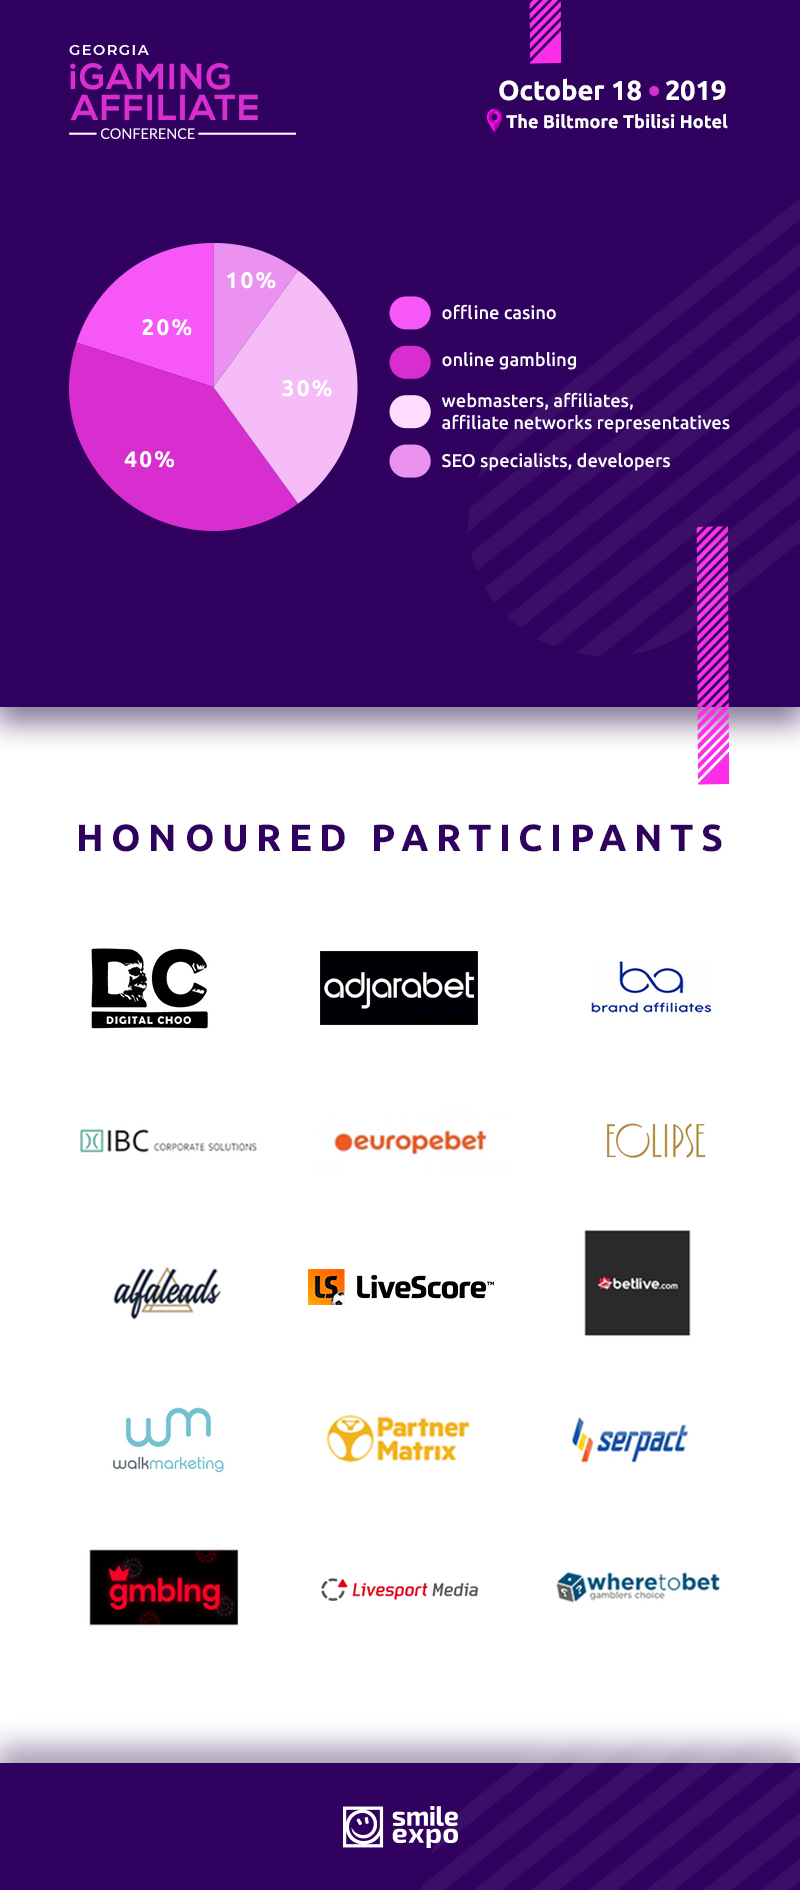 Who Will Attend Georgia iGaming Affiliate Conference? Honorable Participants of the Event: Infographic